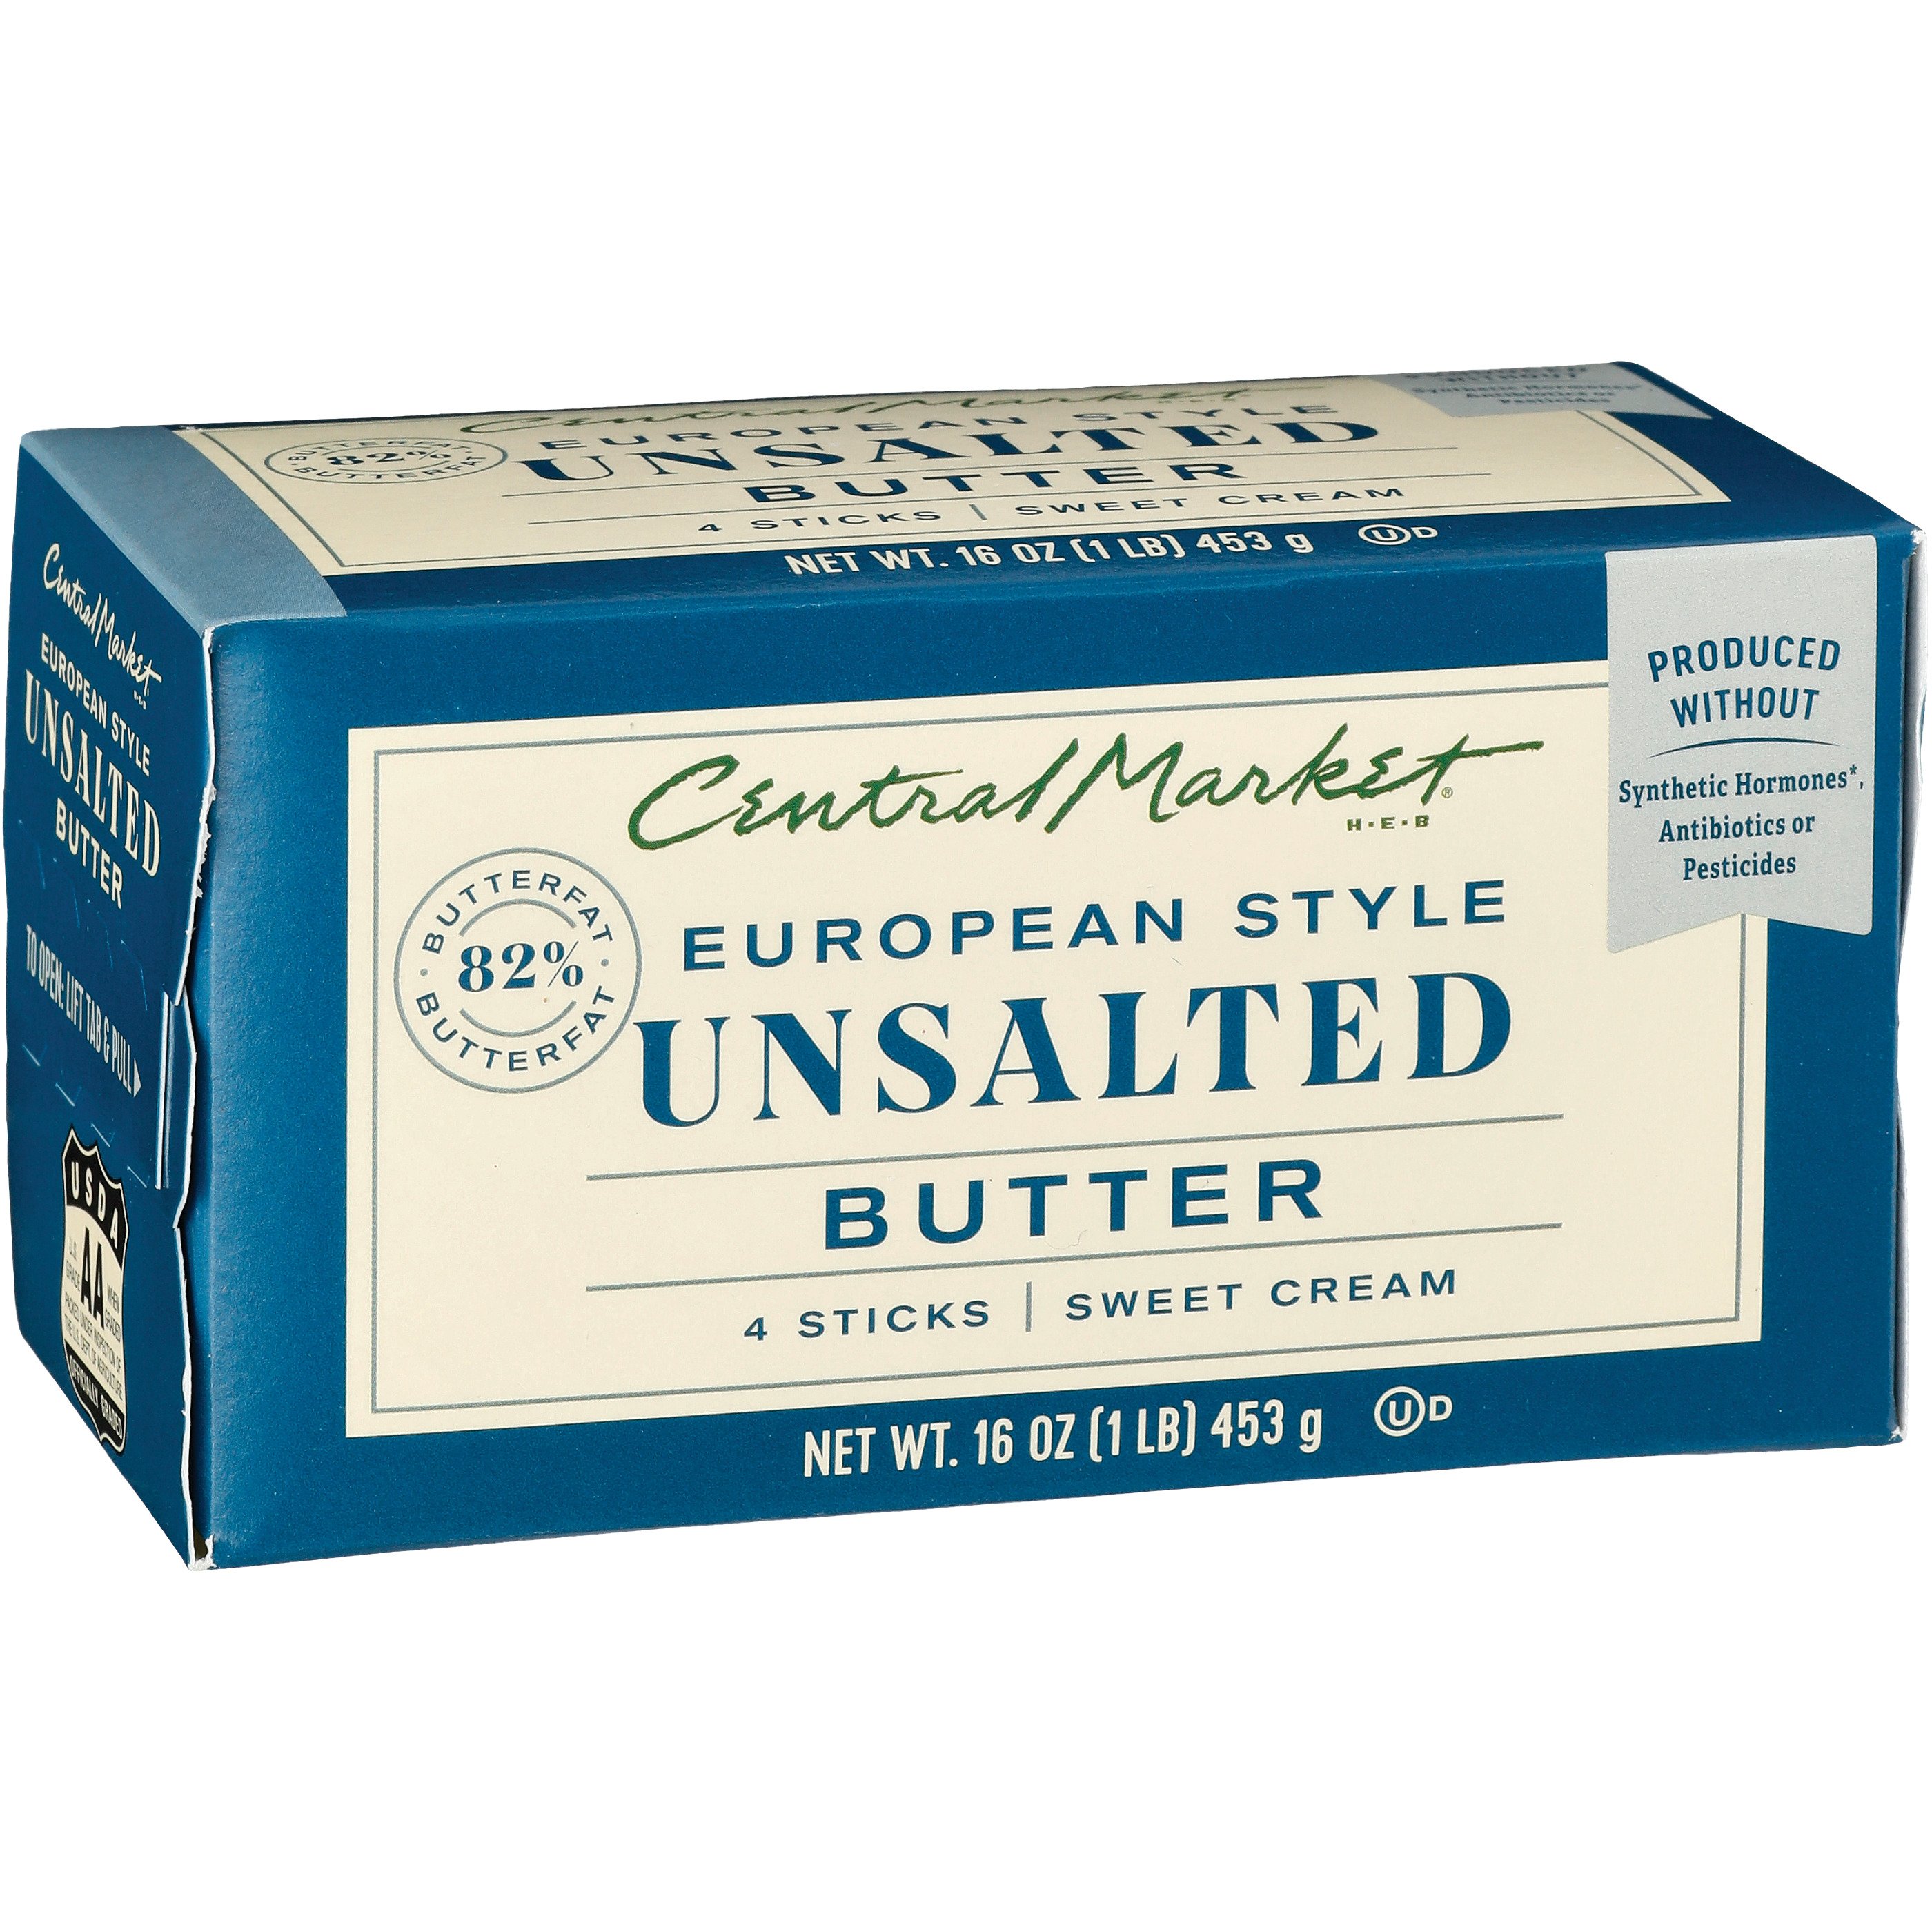 Butter Unsalted Reduced Fat